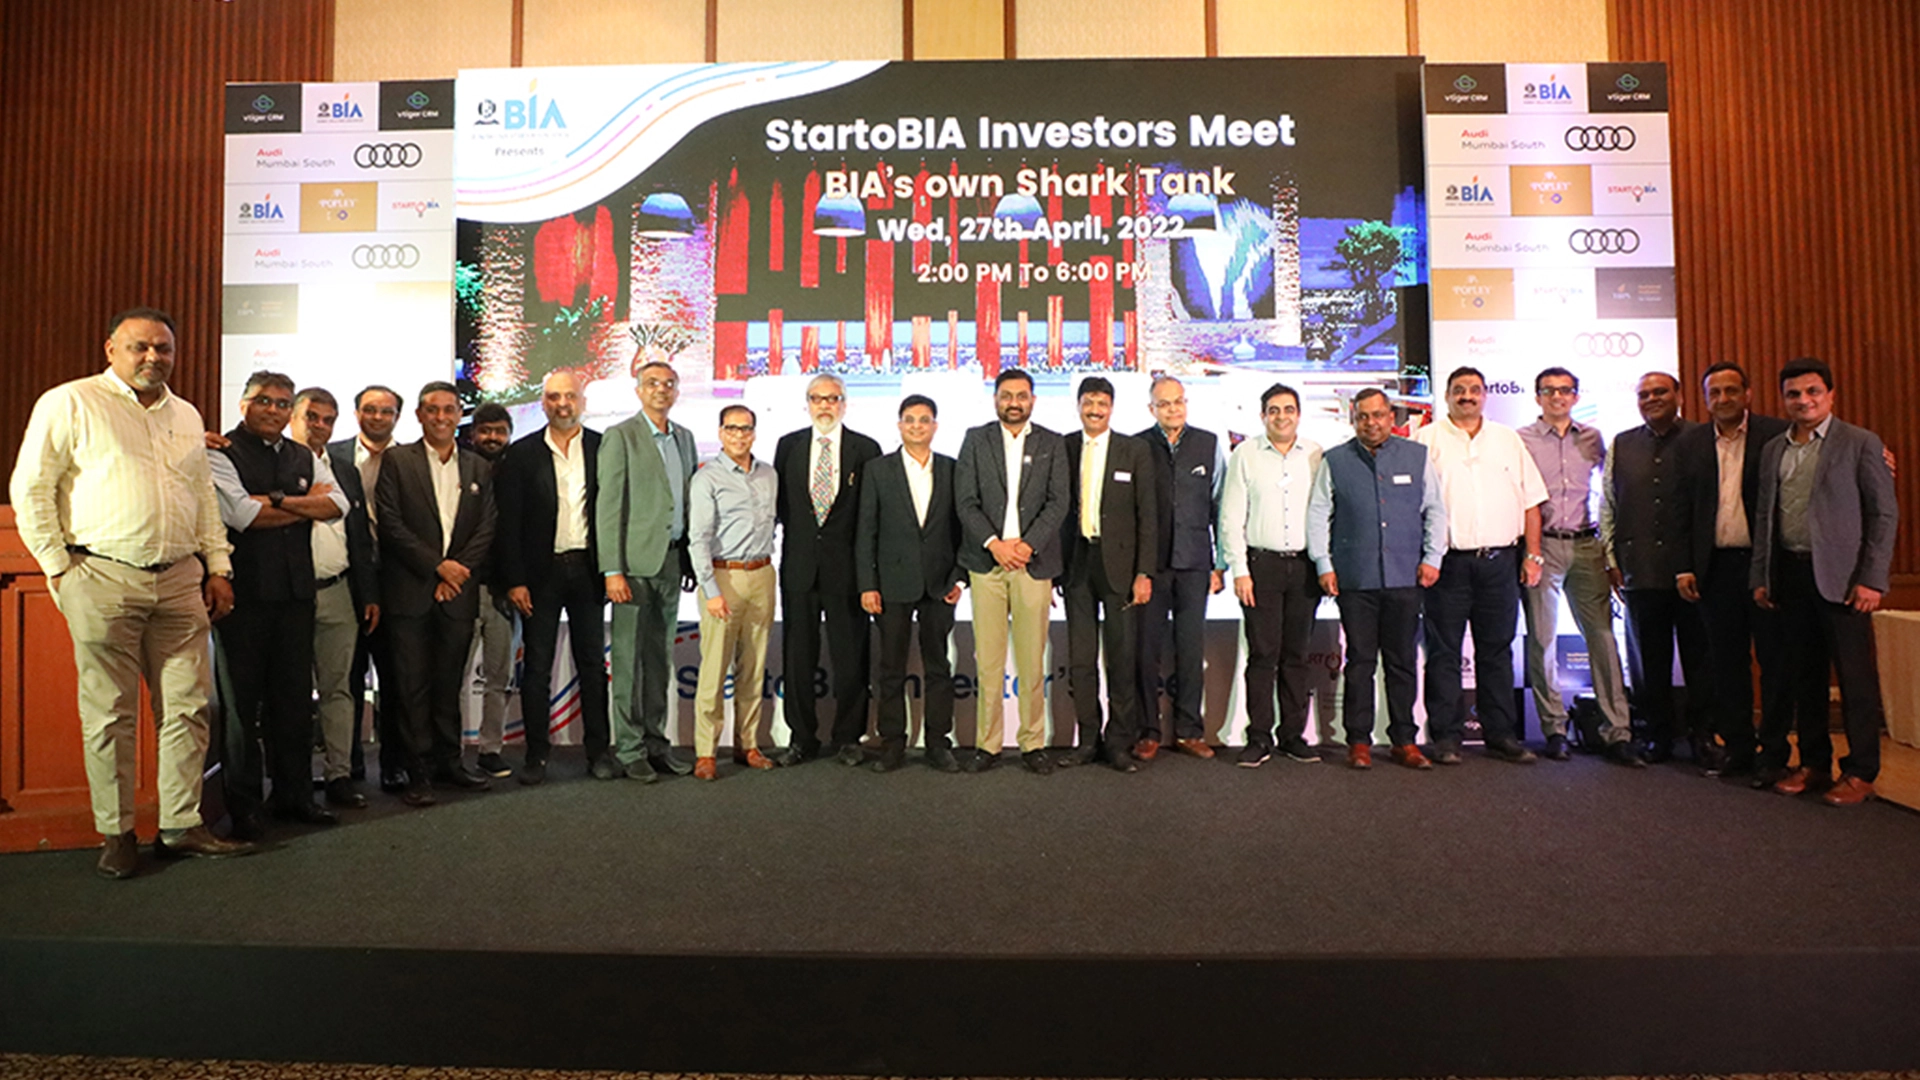 Mr. Nevil Sanghvi withhis investor club members at the startobia organised by bombay industries association BIA